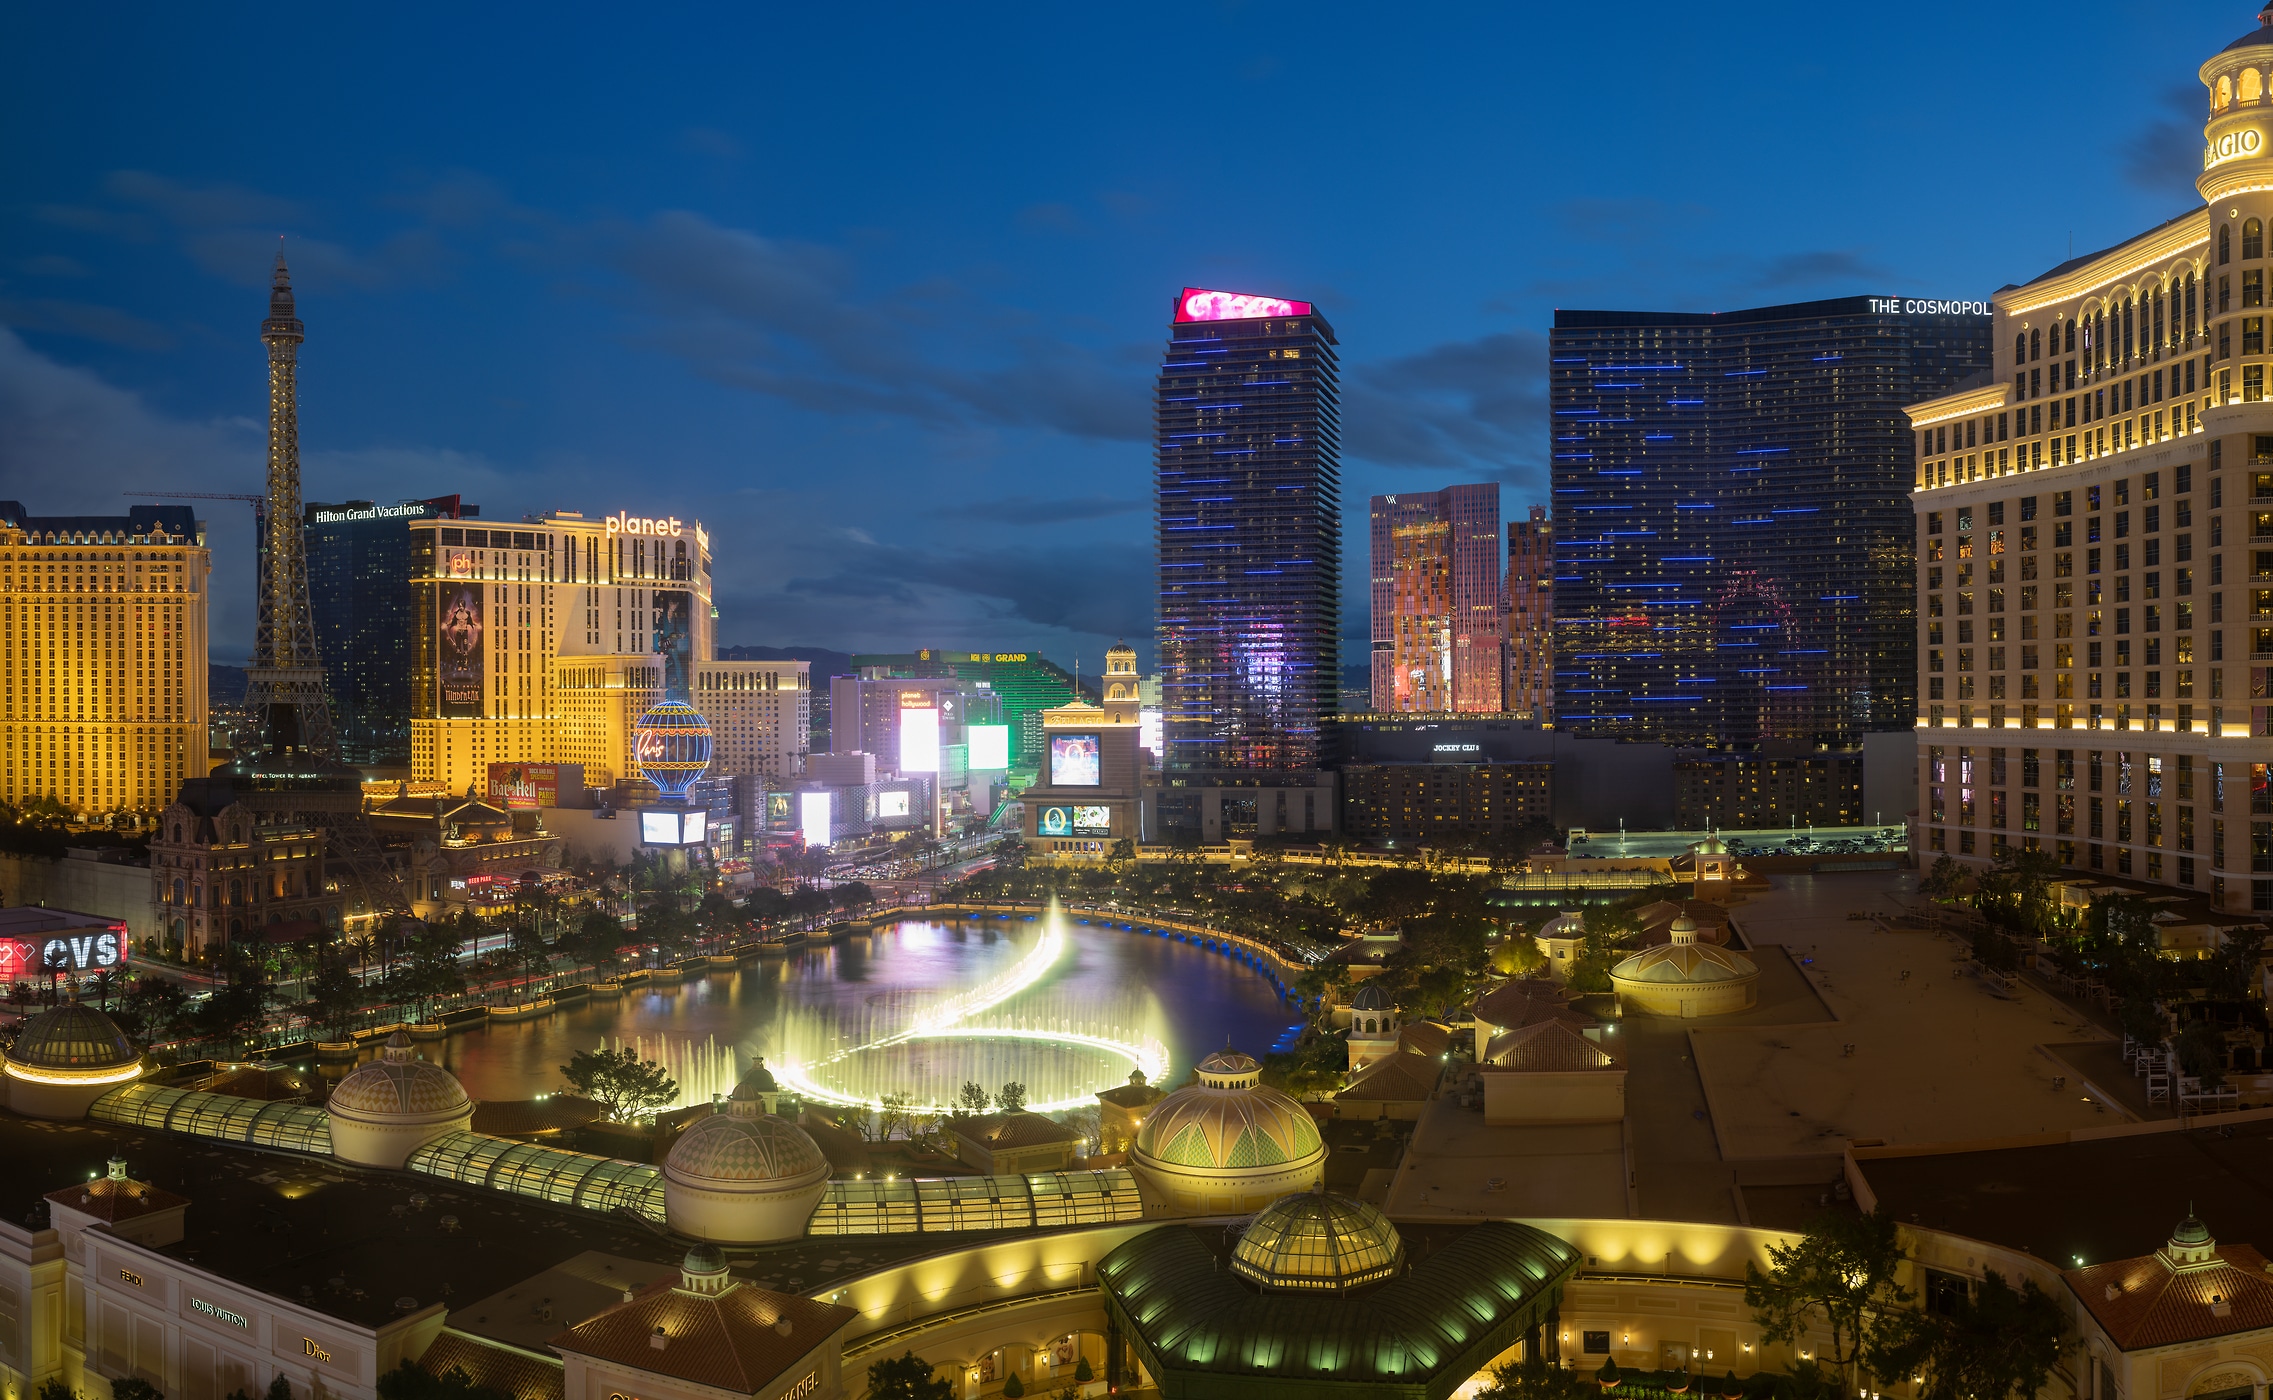 444 megapixels! A very high resolution, large-format VAST photo print of Las Vegas with the Bellagio fountains at night; cityscape photograph created by Greg Probst in Las Vegas, Nevada, USA.